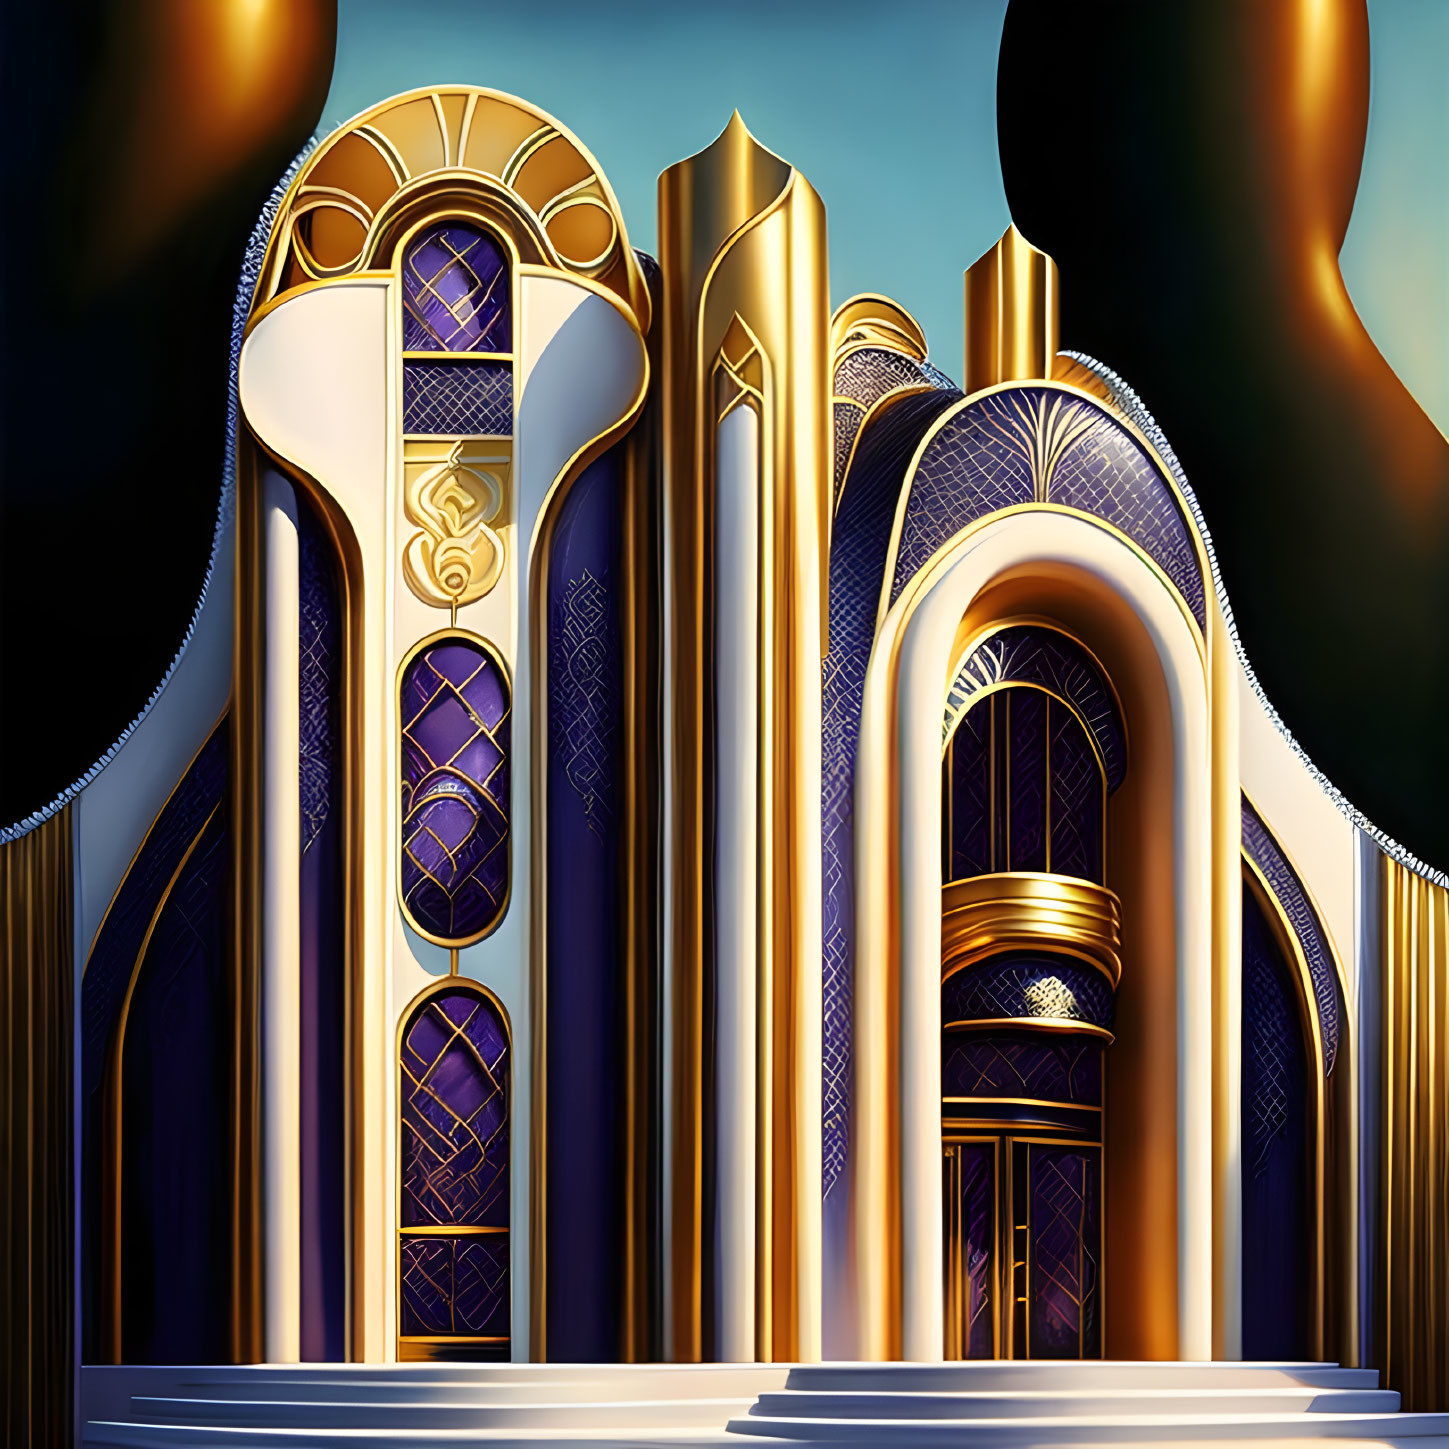 Gold and Blue Art Deco Building with Ornate Design